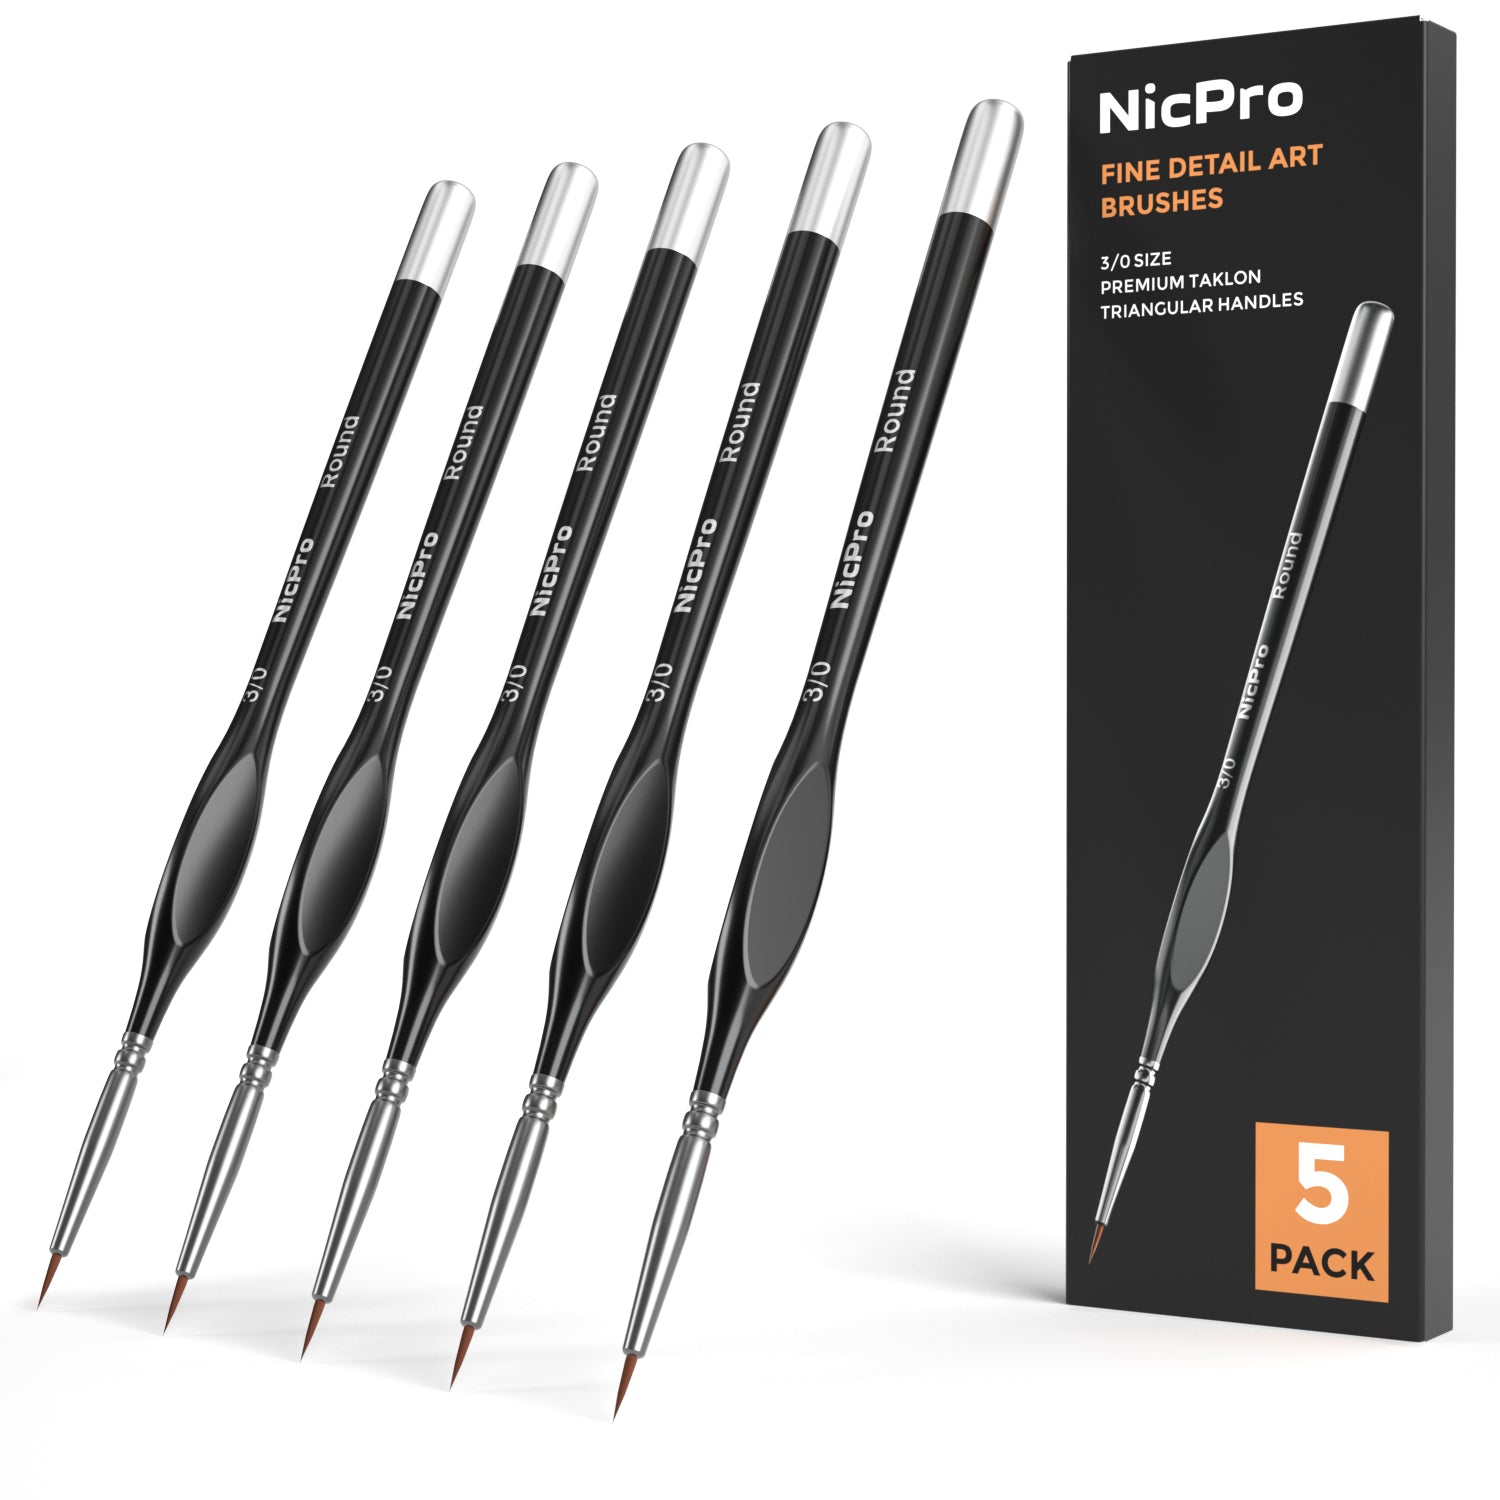 Nicpro Detail Paint Brushes 5 PCS Fine Tip 000 Professional Miniature Painting Kit Round 3/0 Art Brush Black for Micro Watercolor Oil Acrylic Craft Models Rock Army Painting